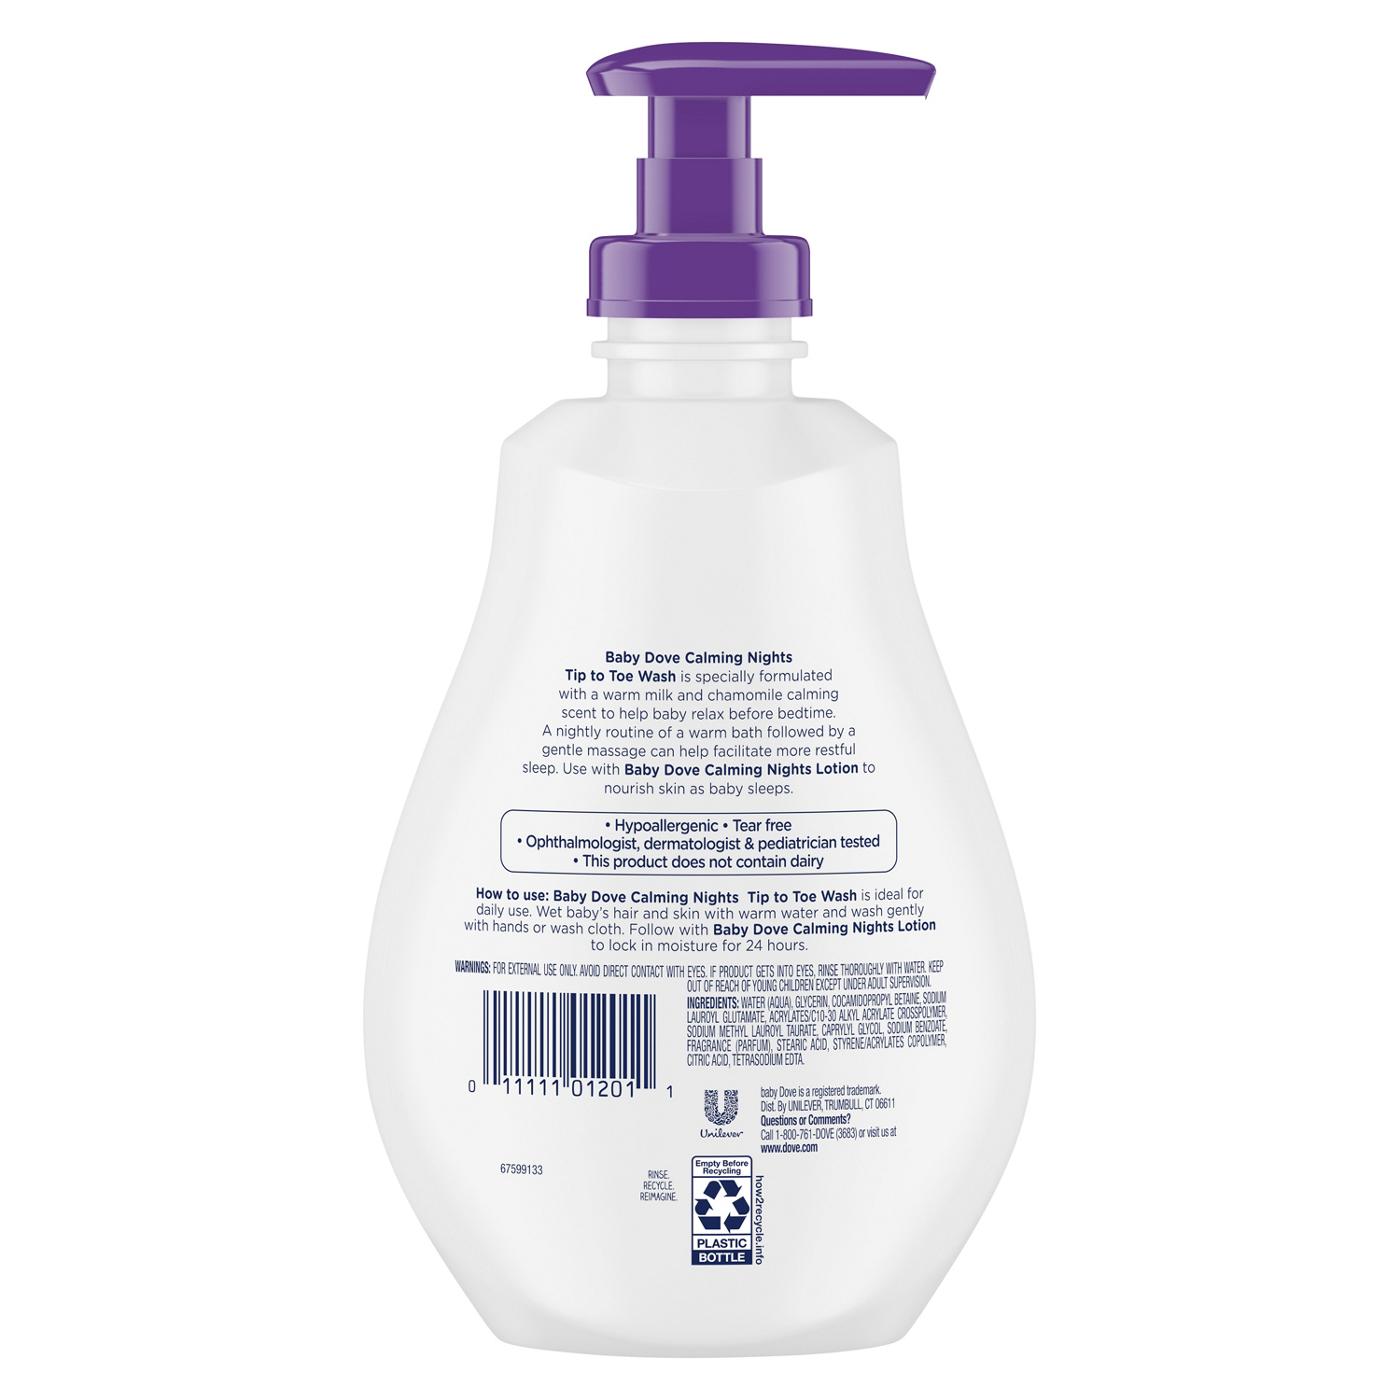 Baby Dove Sensitive Skin Care Night Time Wash; image 3 of 3